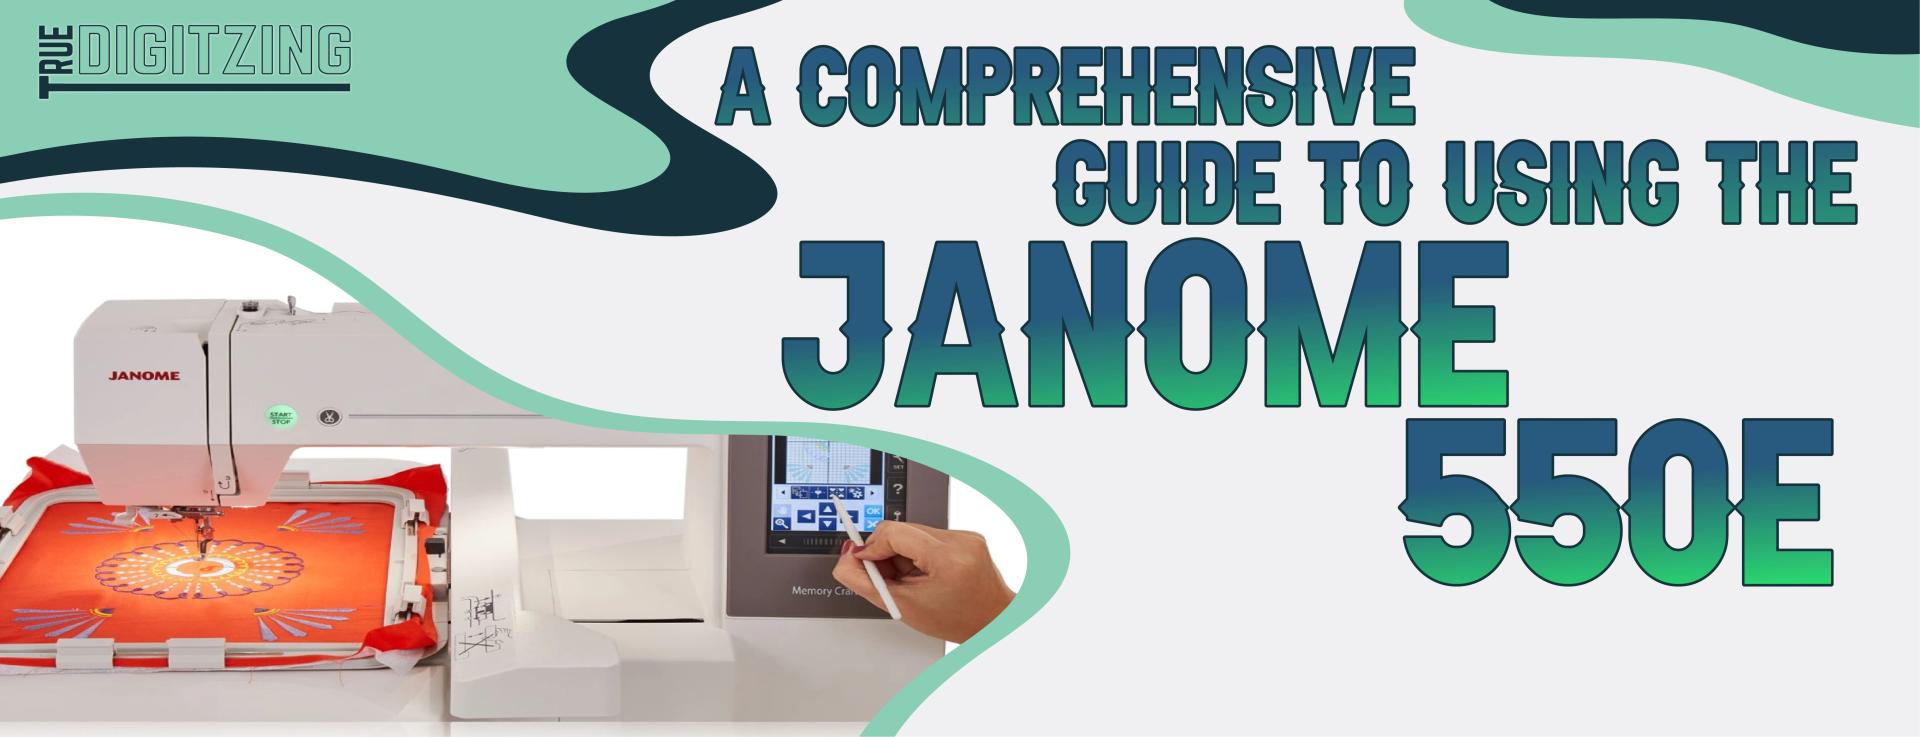 Guide to Using the Janome 550E